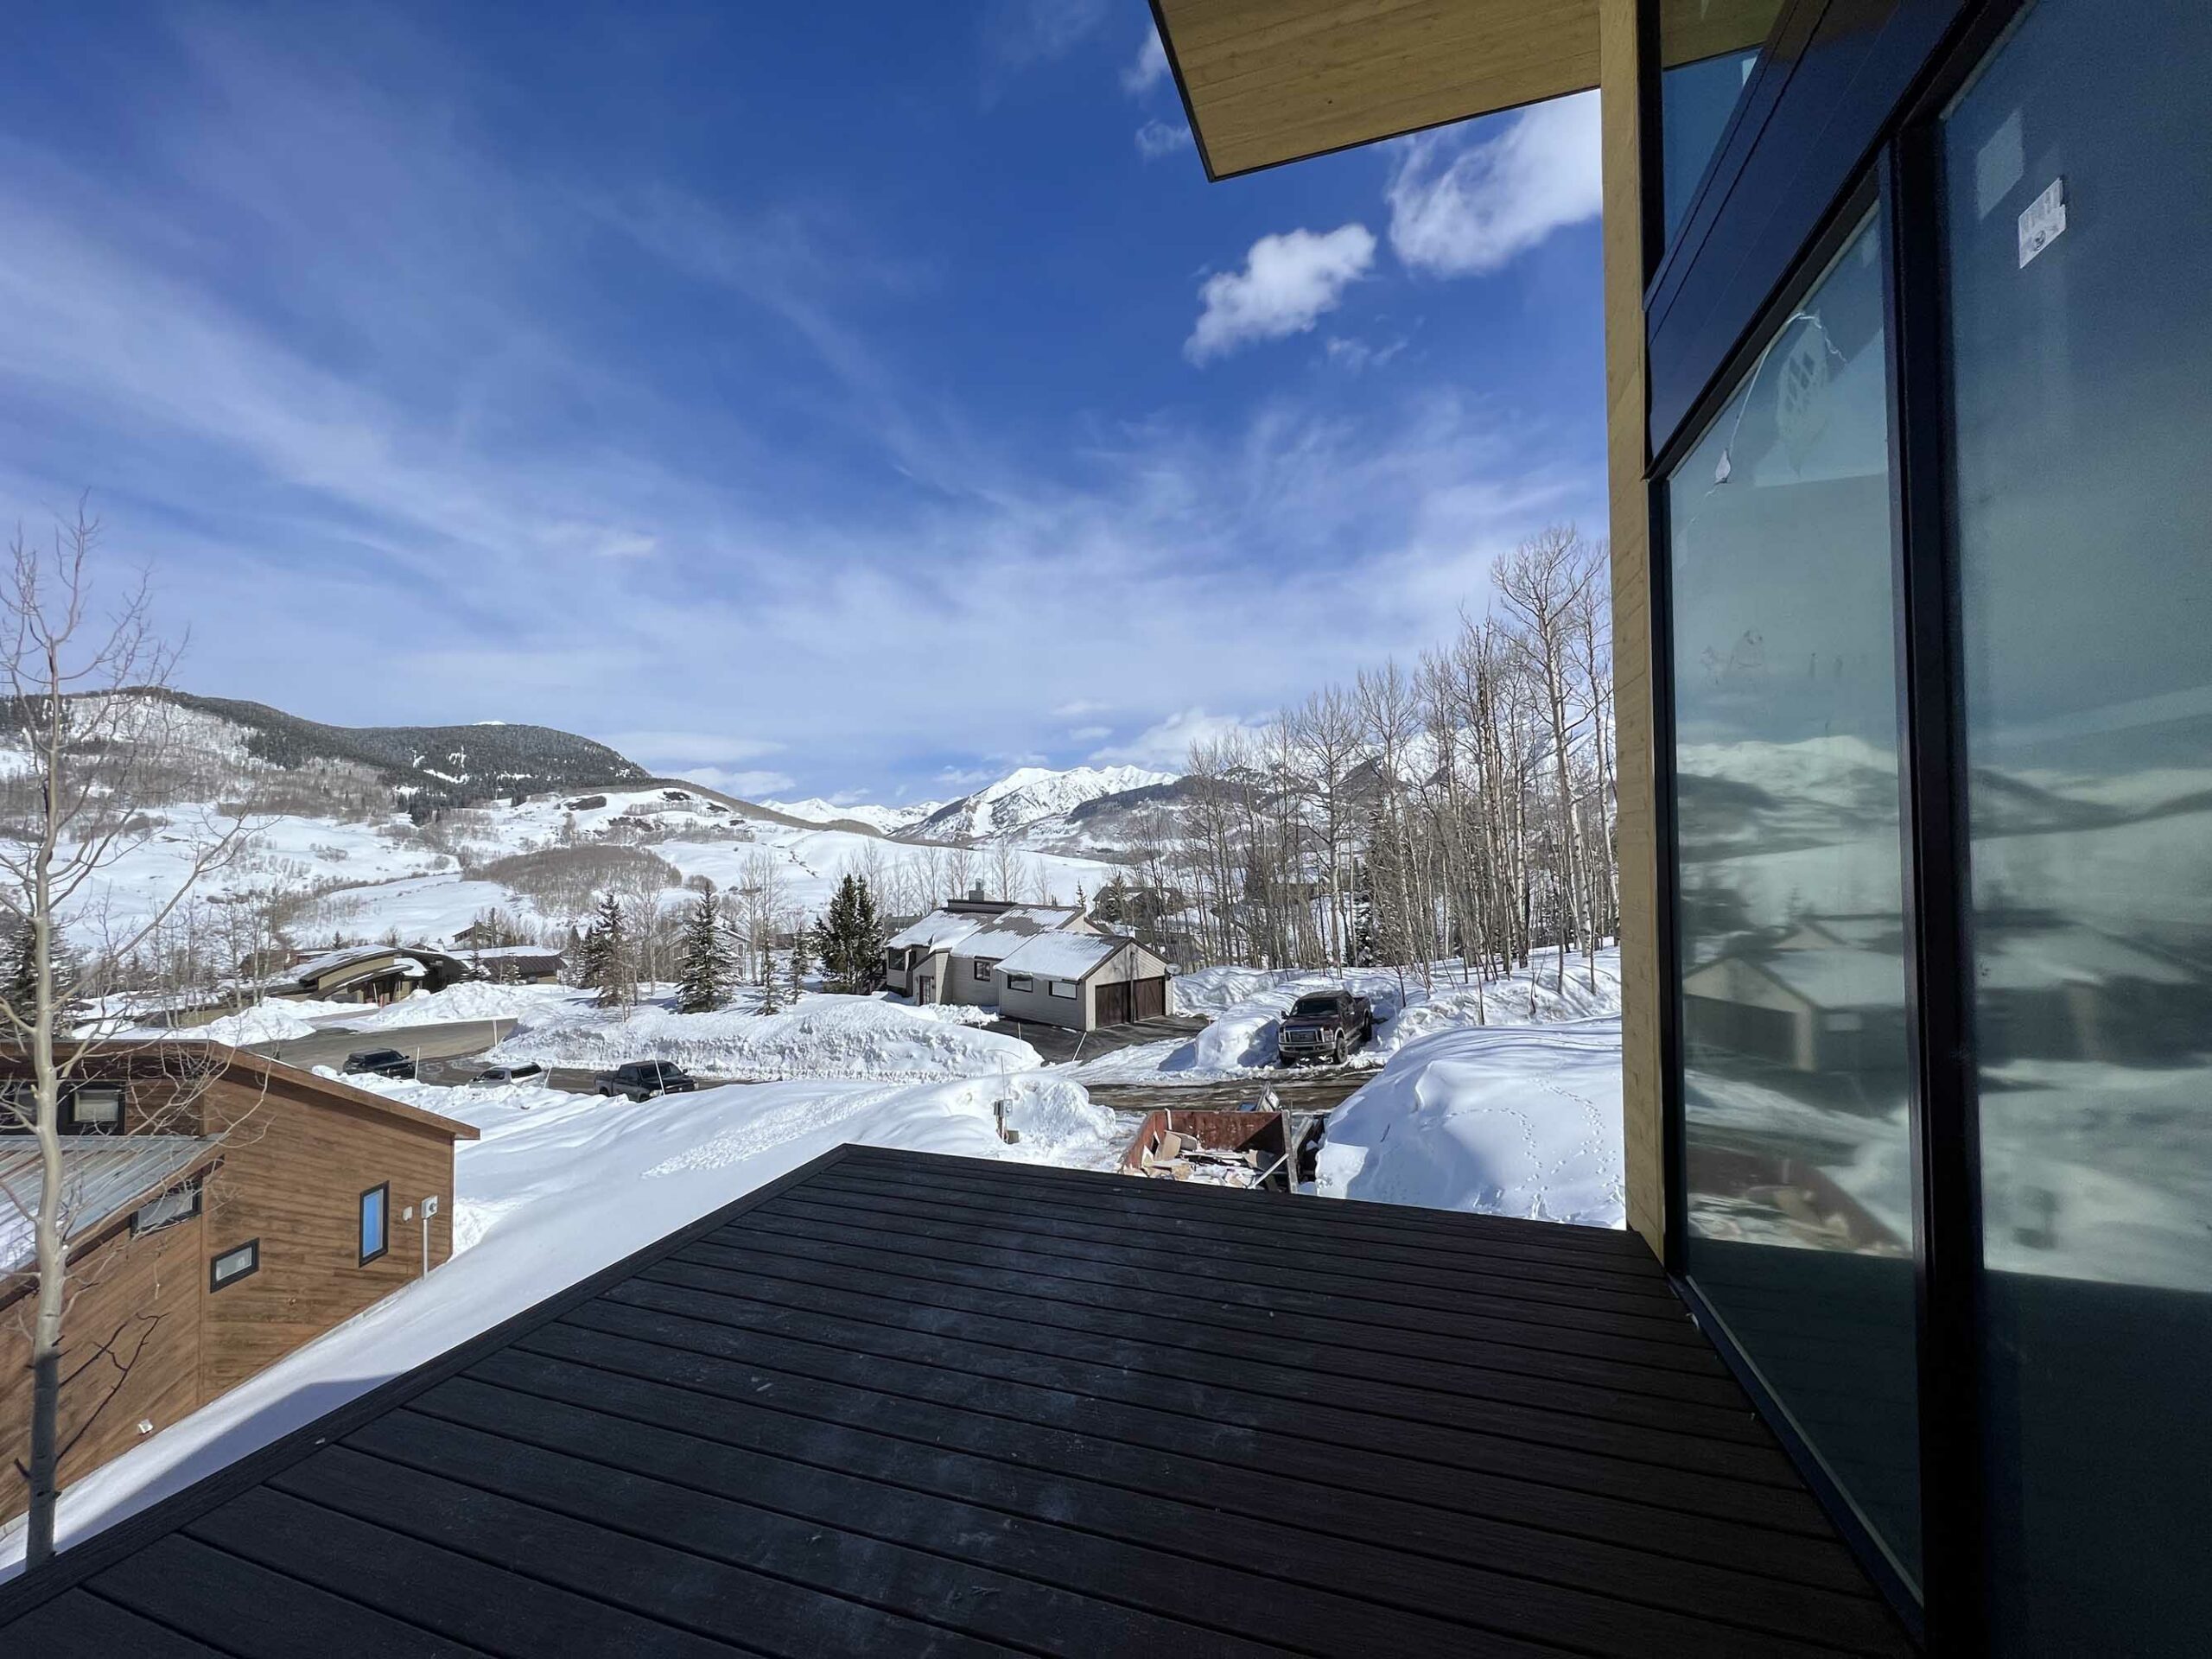 38 Ruby Drive Mt. Crested Butte, Colorado - mountain views